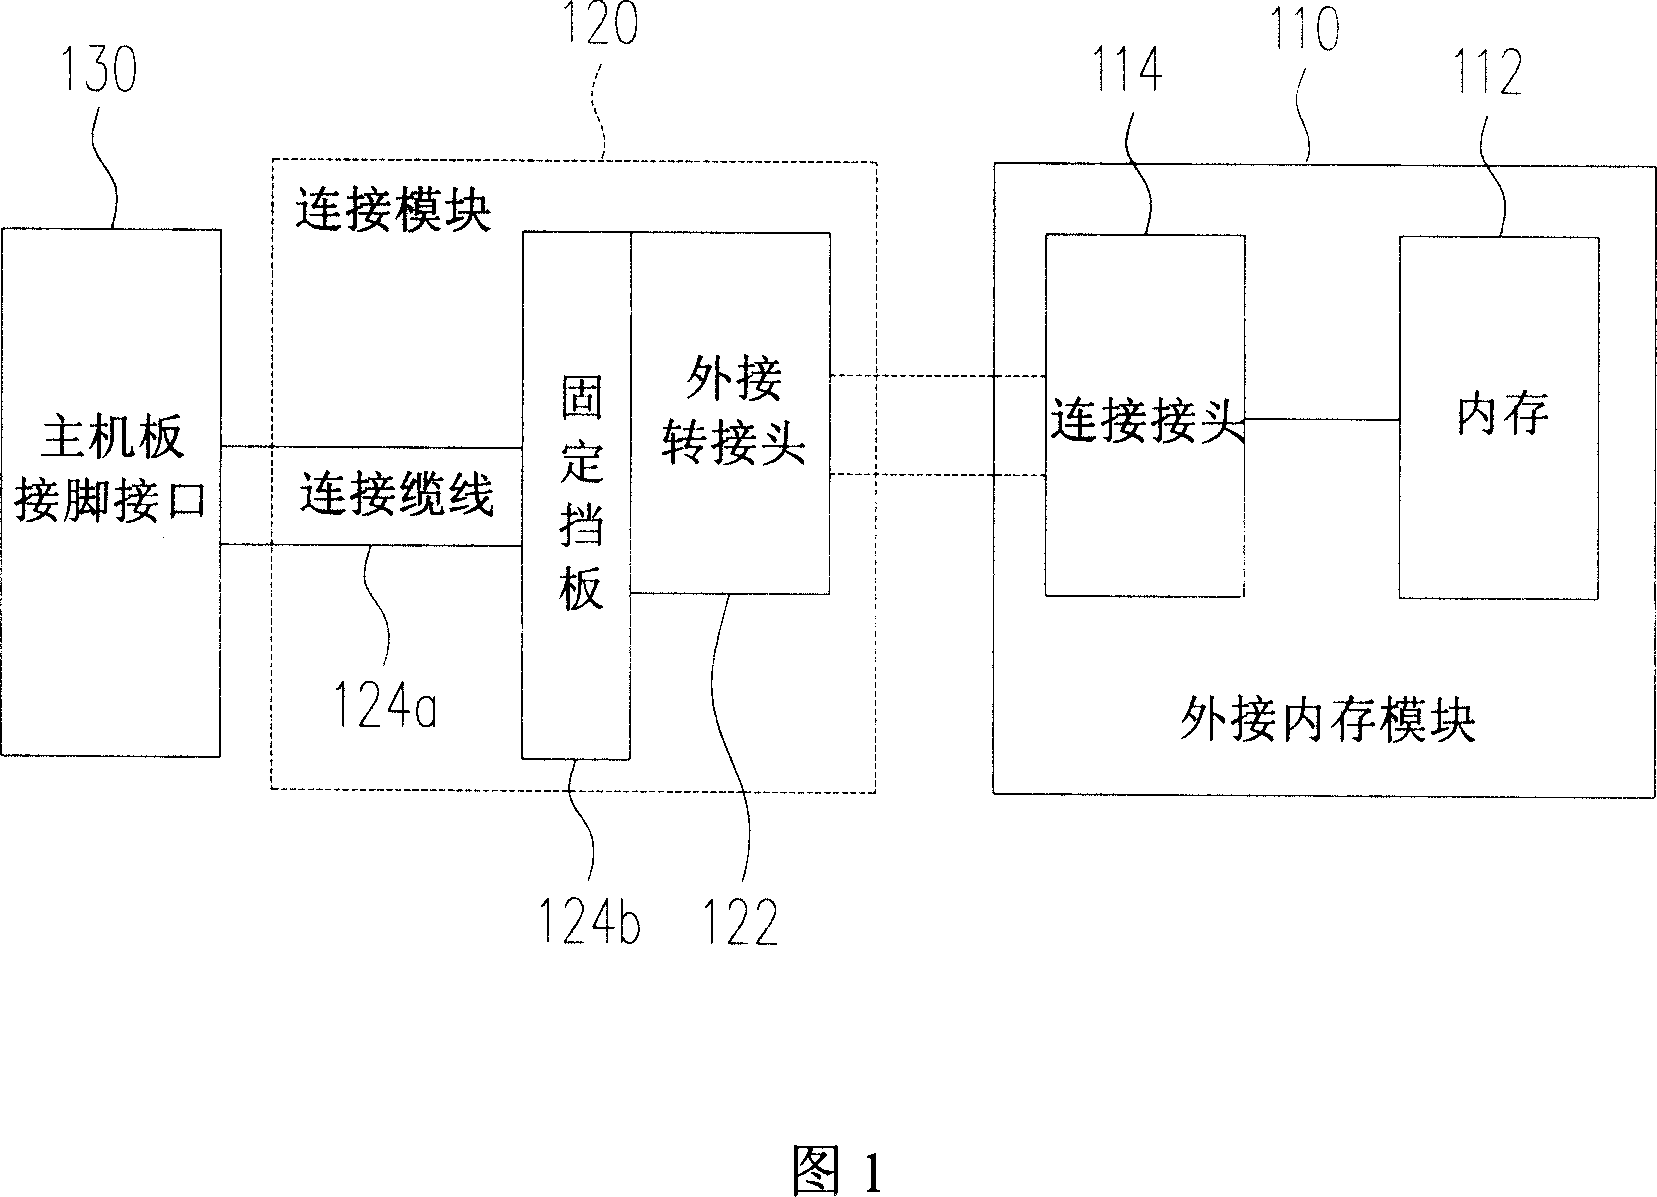 External connection type ROM-BIOS device